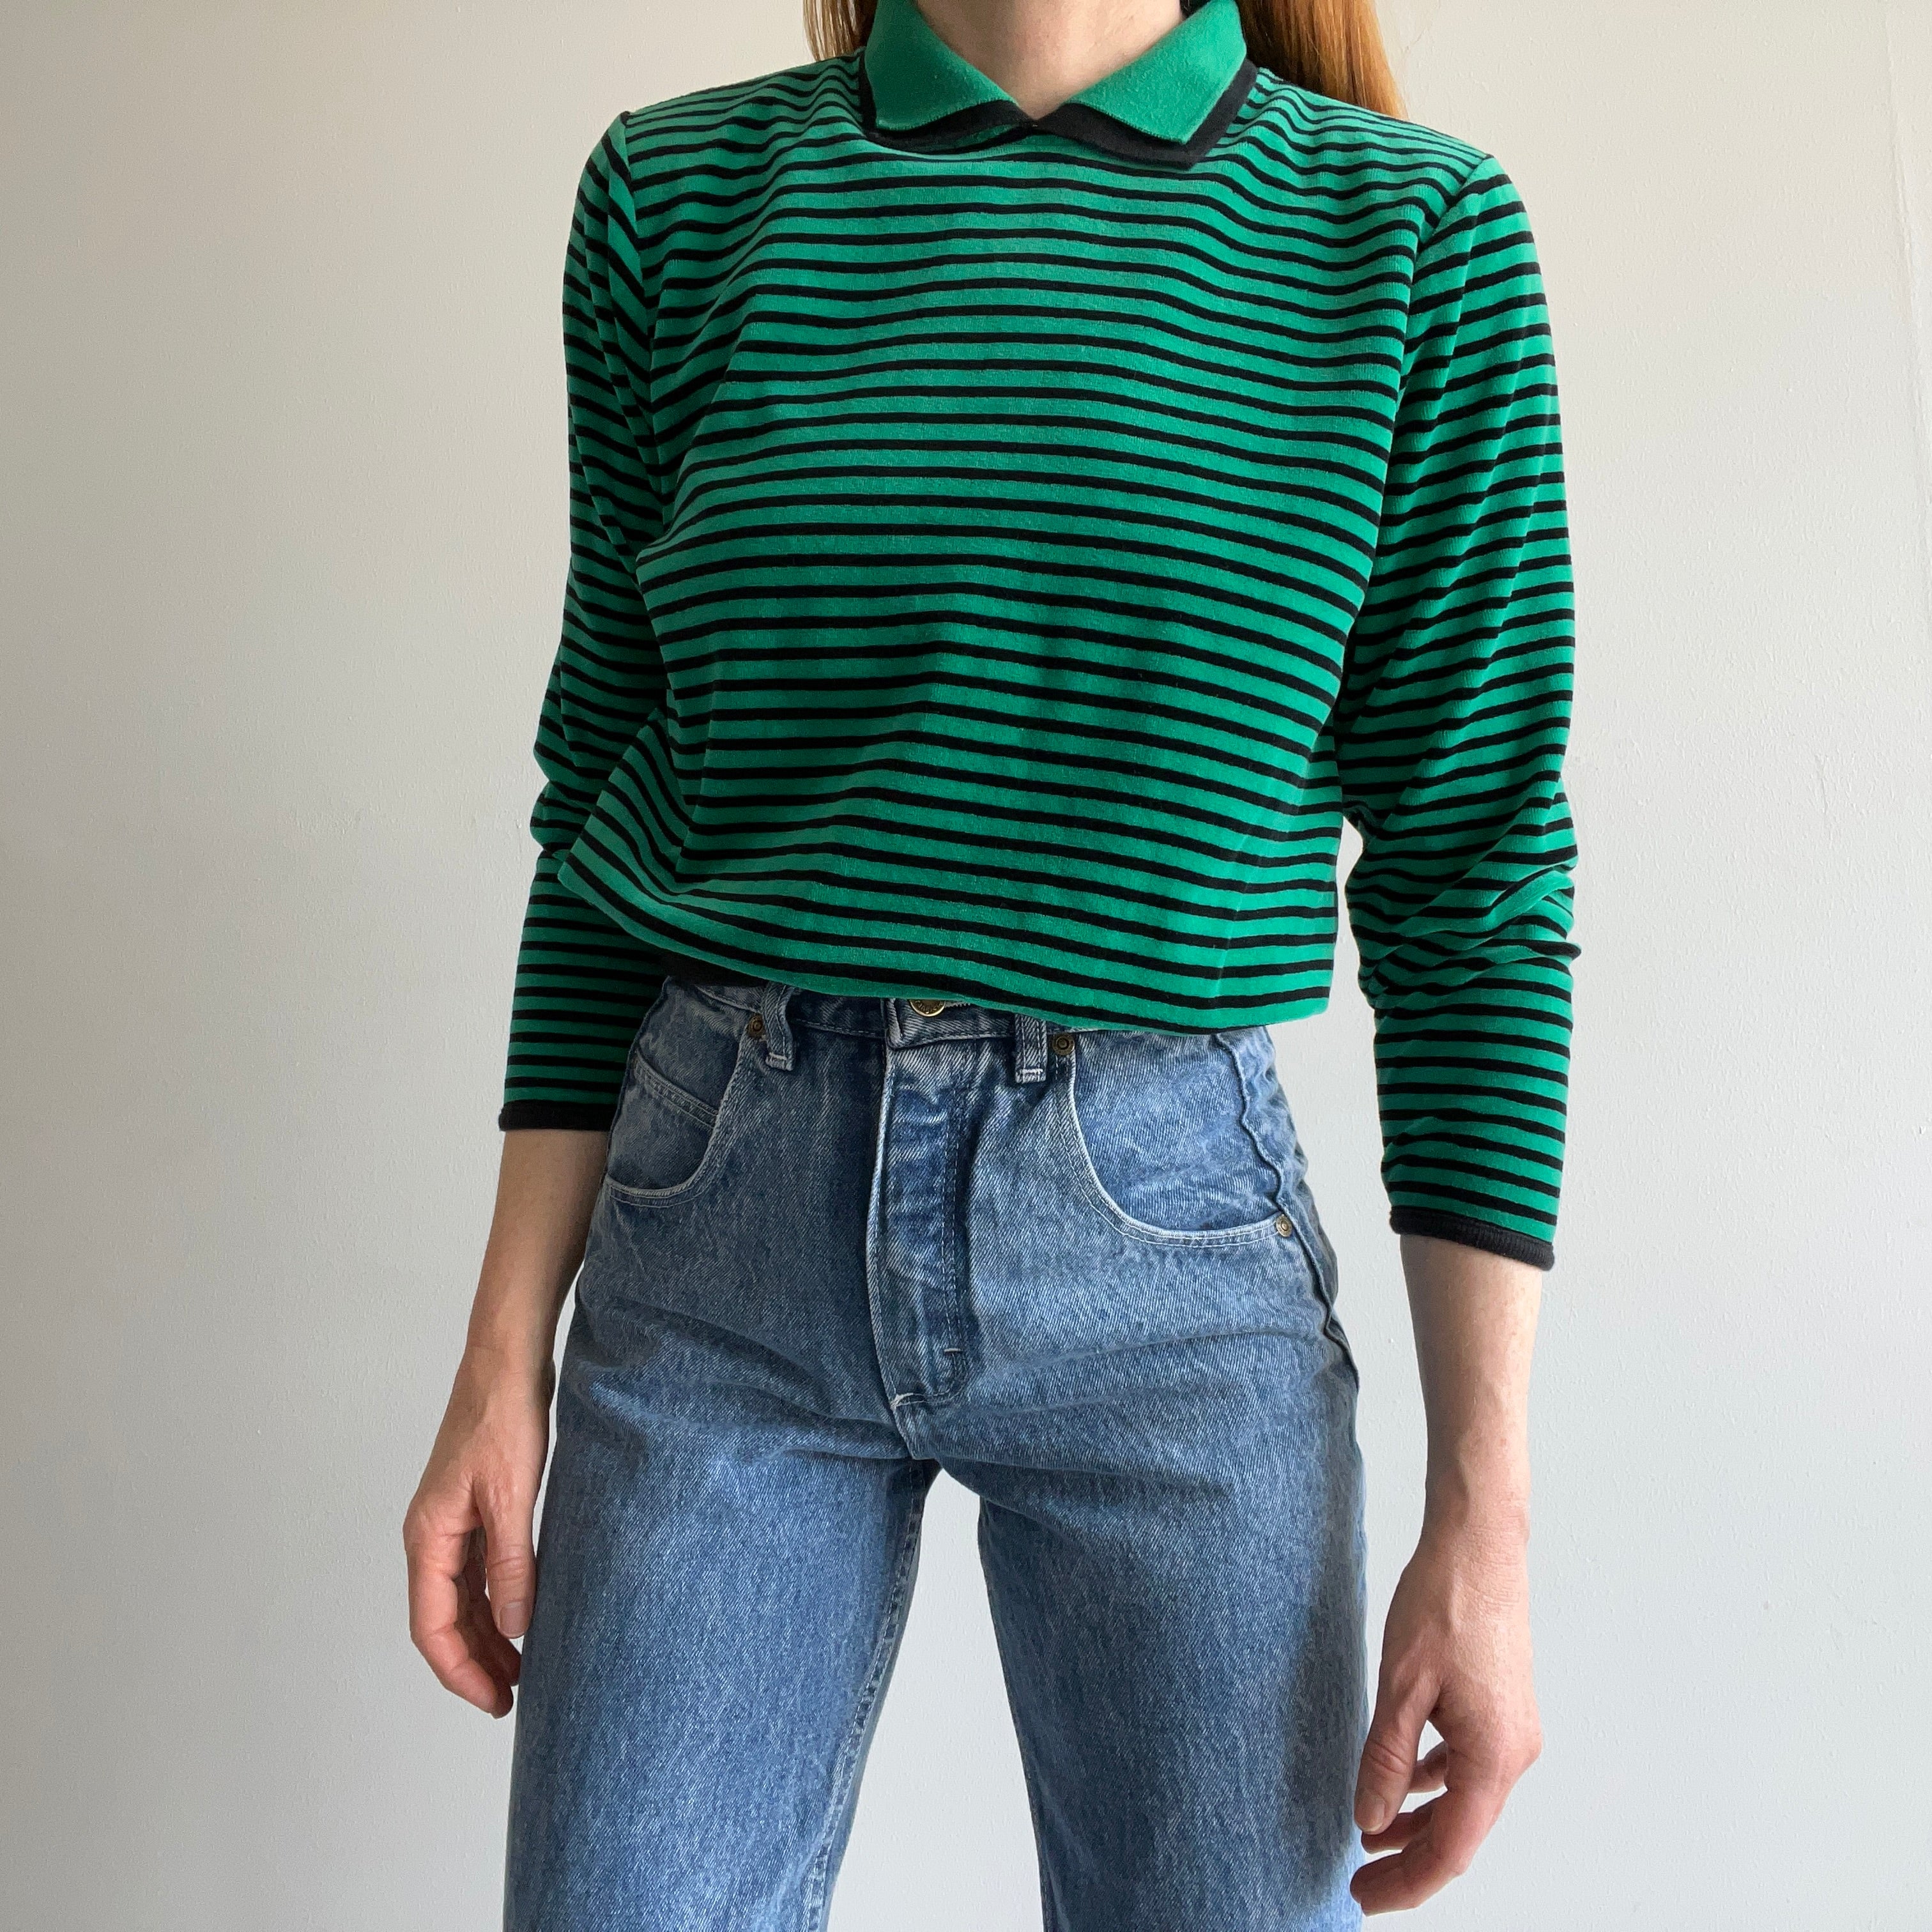 1980s Delightful Velour Striped Sweatshirt/Blouse/Top with a Built in Collar - OMG!